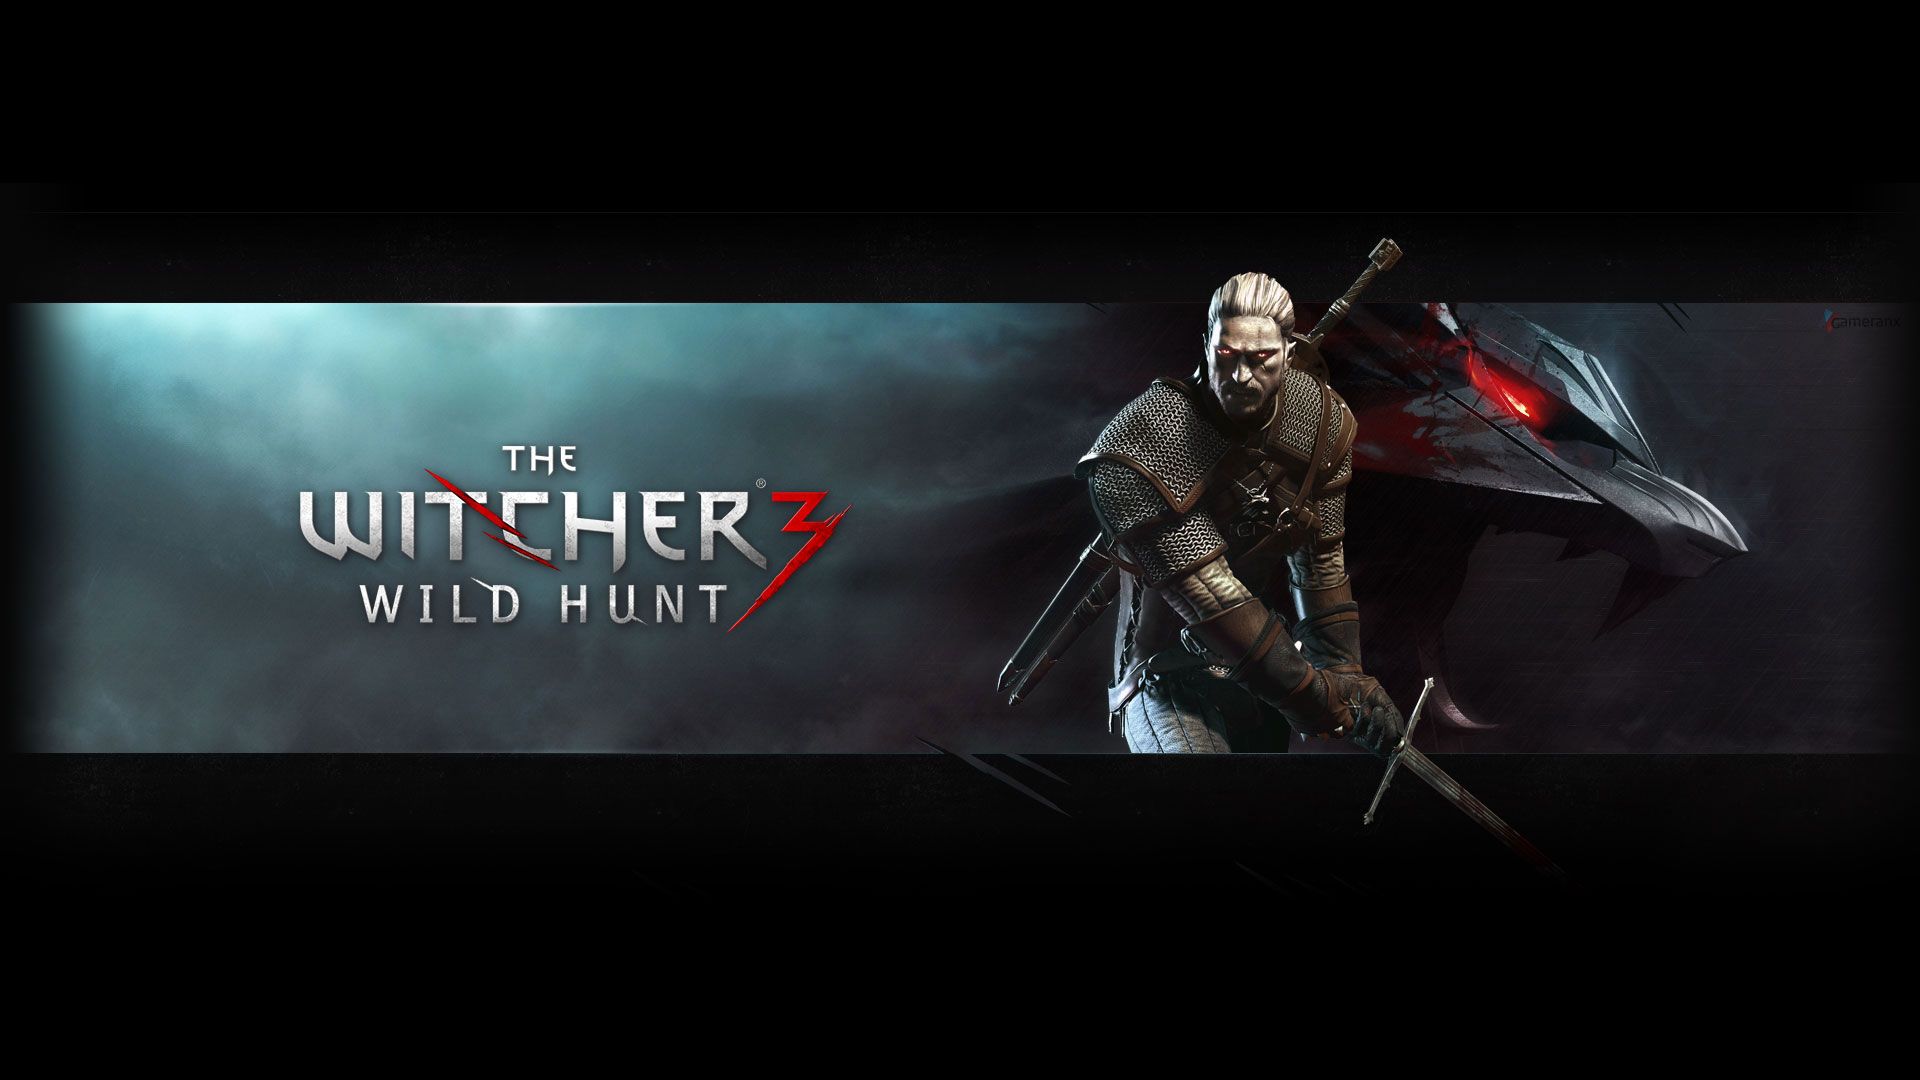 The Witcher, PC Wallpaper